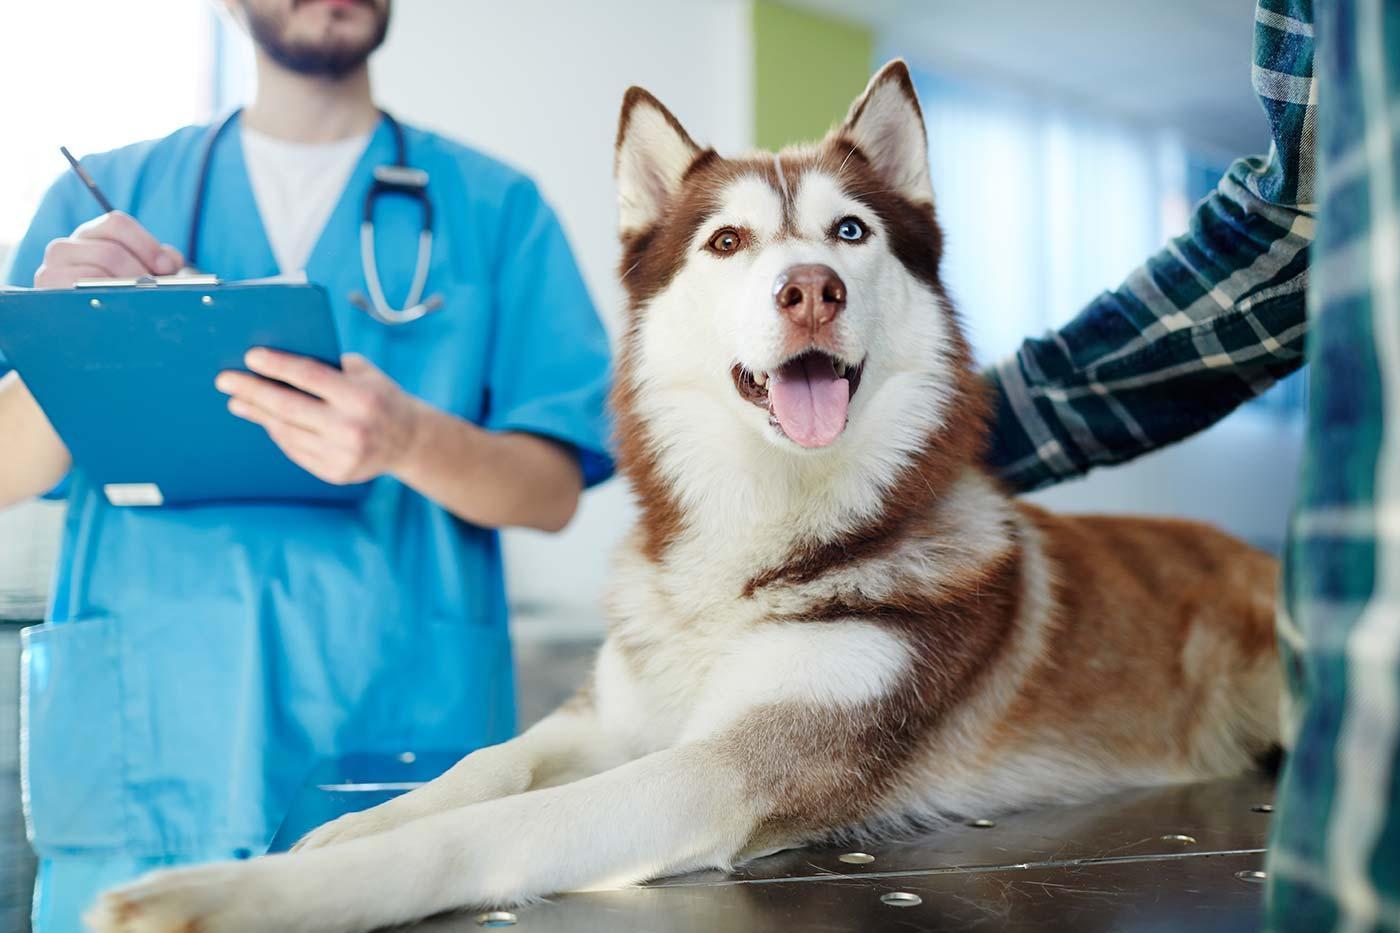 Pet insurance: Do you have a high-maintenance breed?